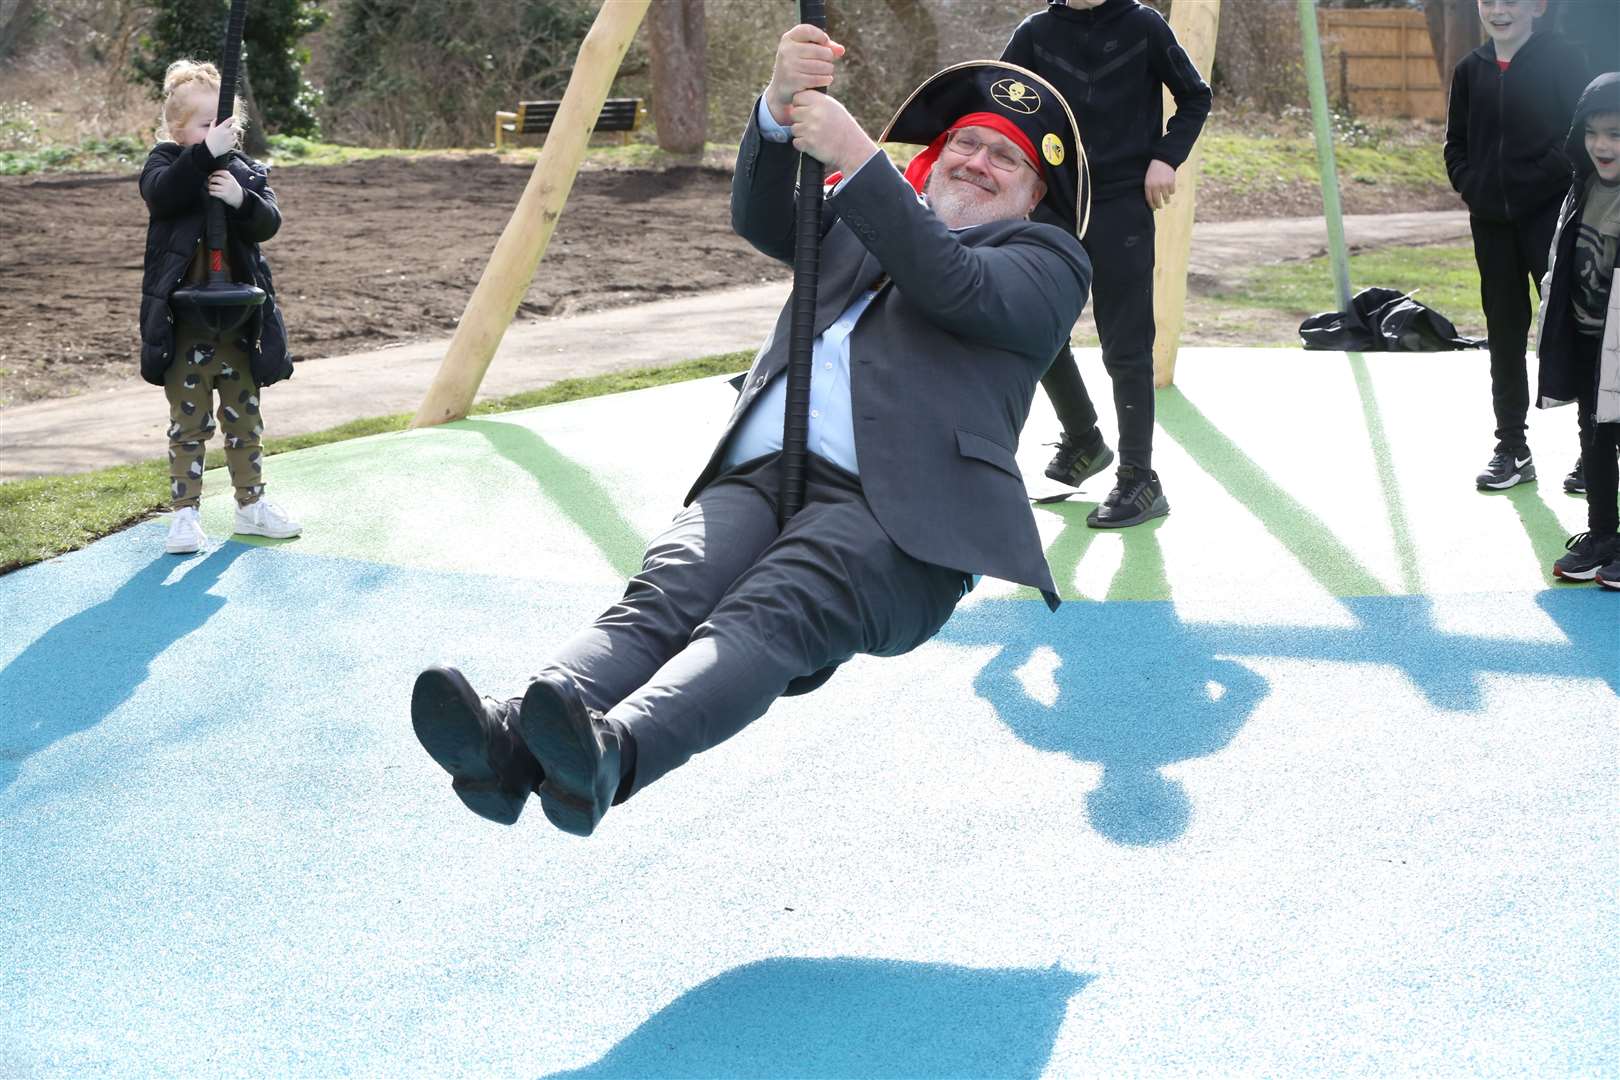 Dartford Council leader Jeremy Kite having fun at the new park. Andy Barnes Photography